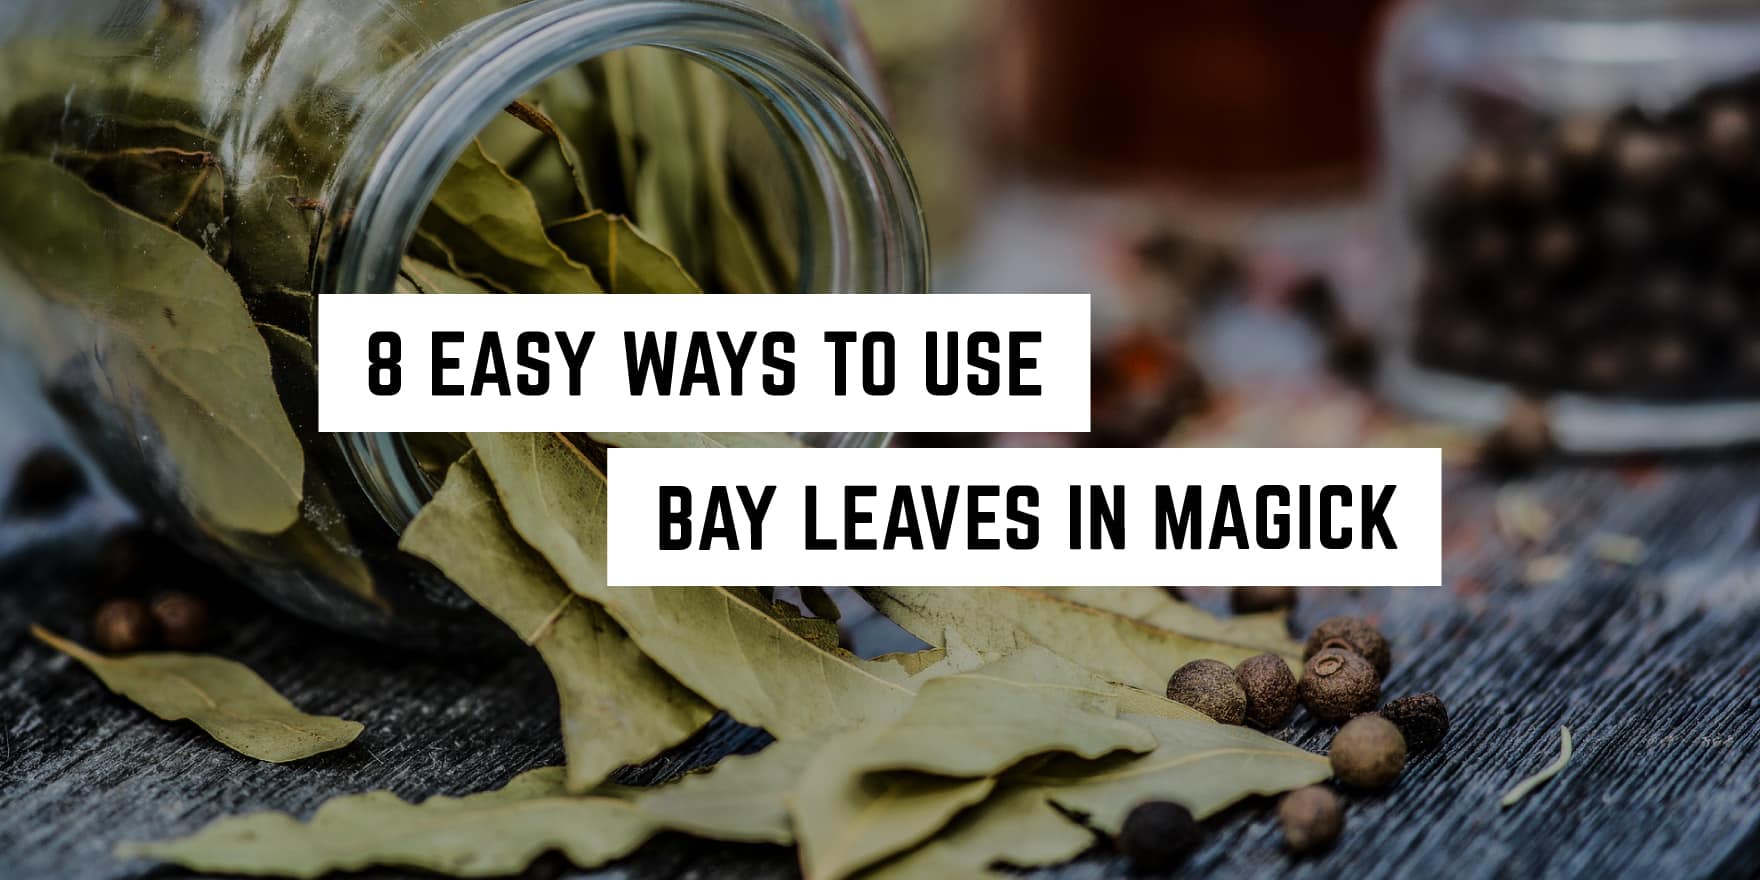 Discover the enchantment: 8 simple rituals with bay leaves for your metaphysical practice.